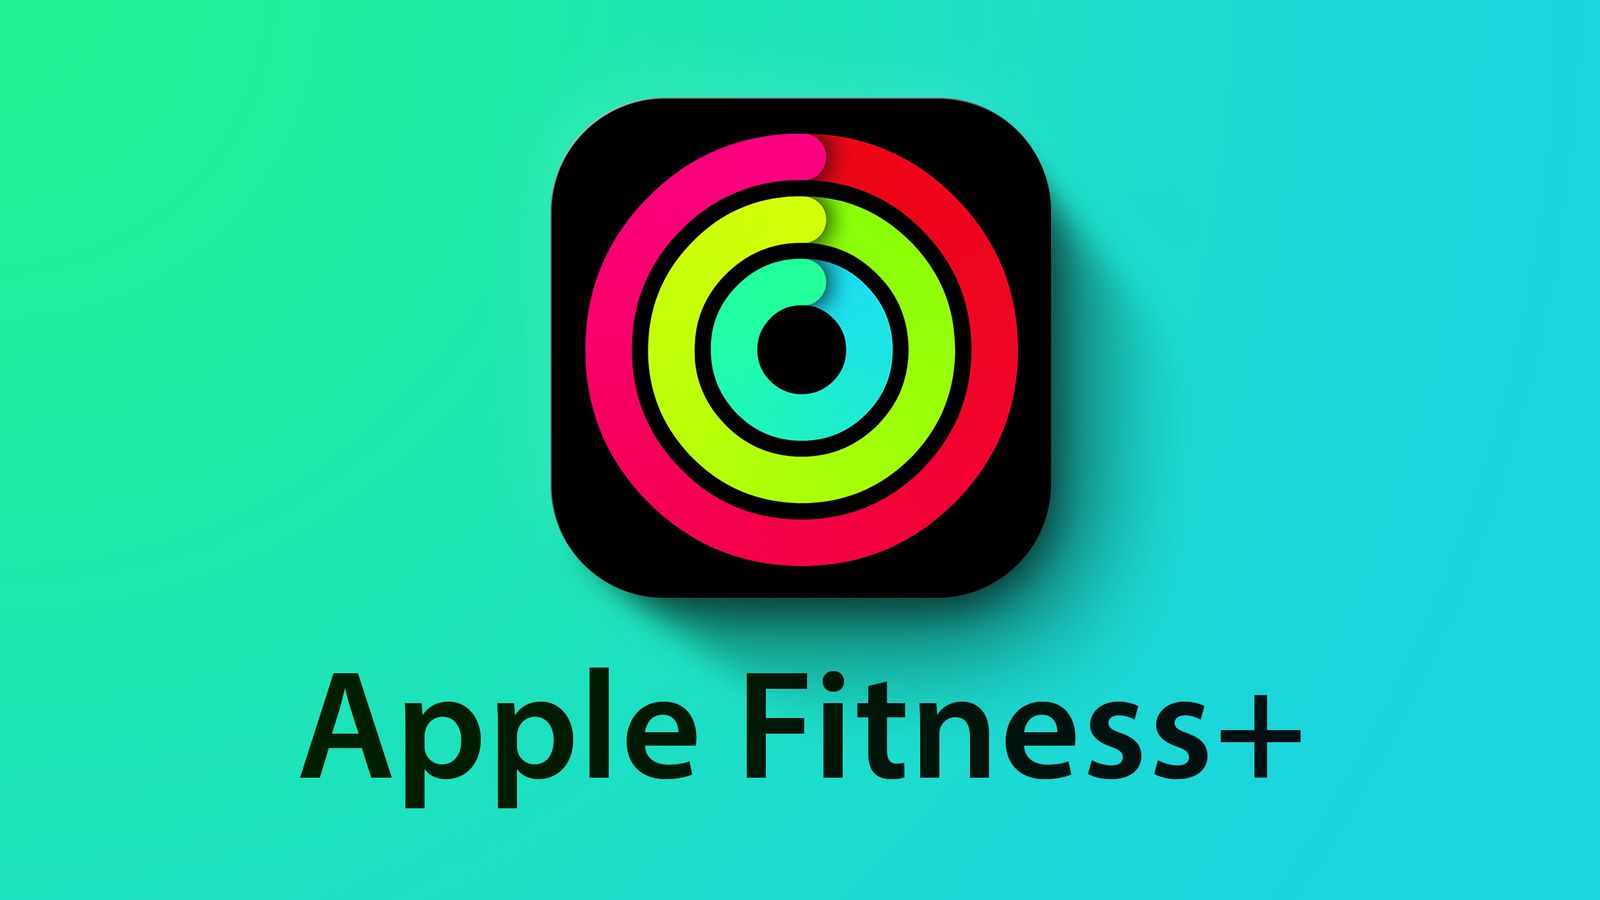 How to Use Apple Fitness+ on Apple Watch